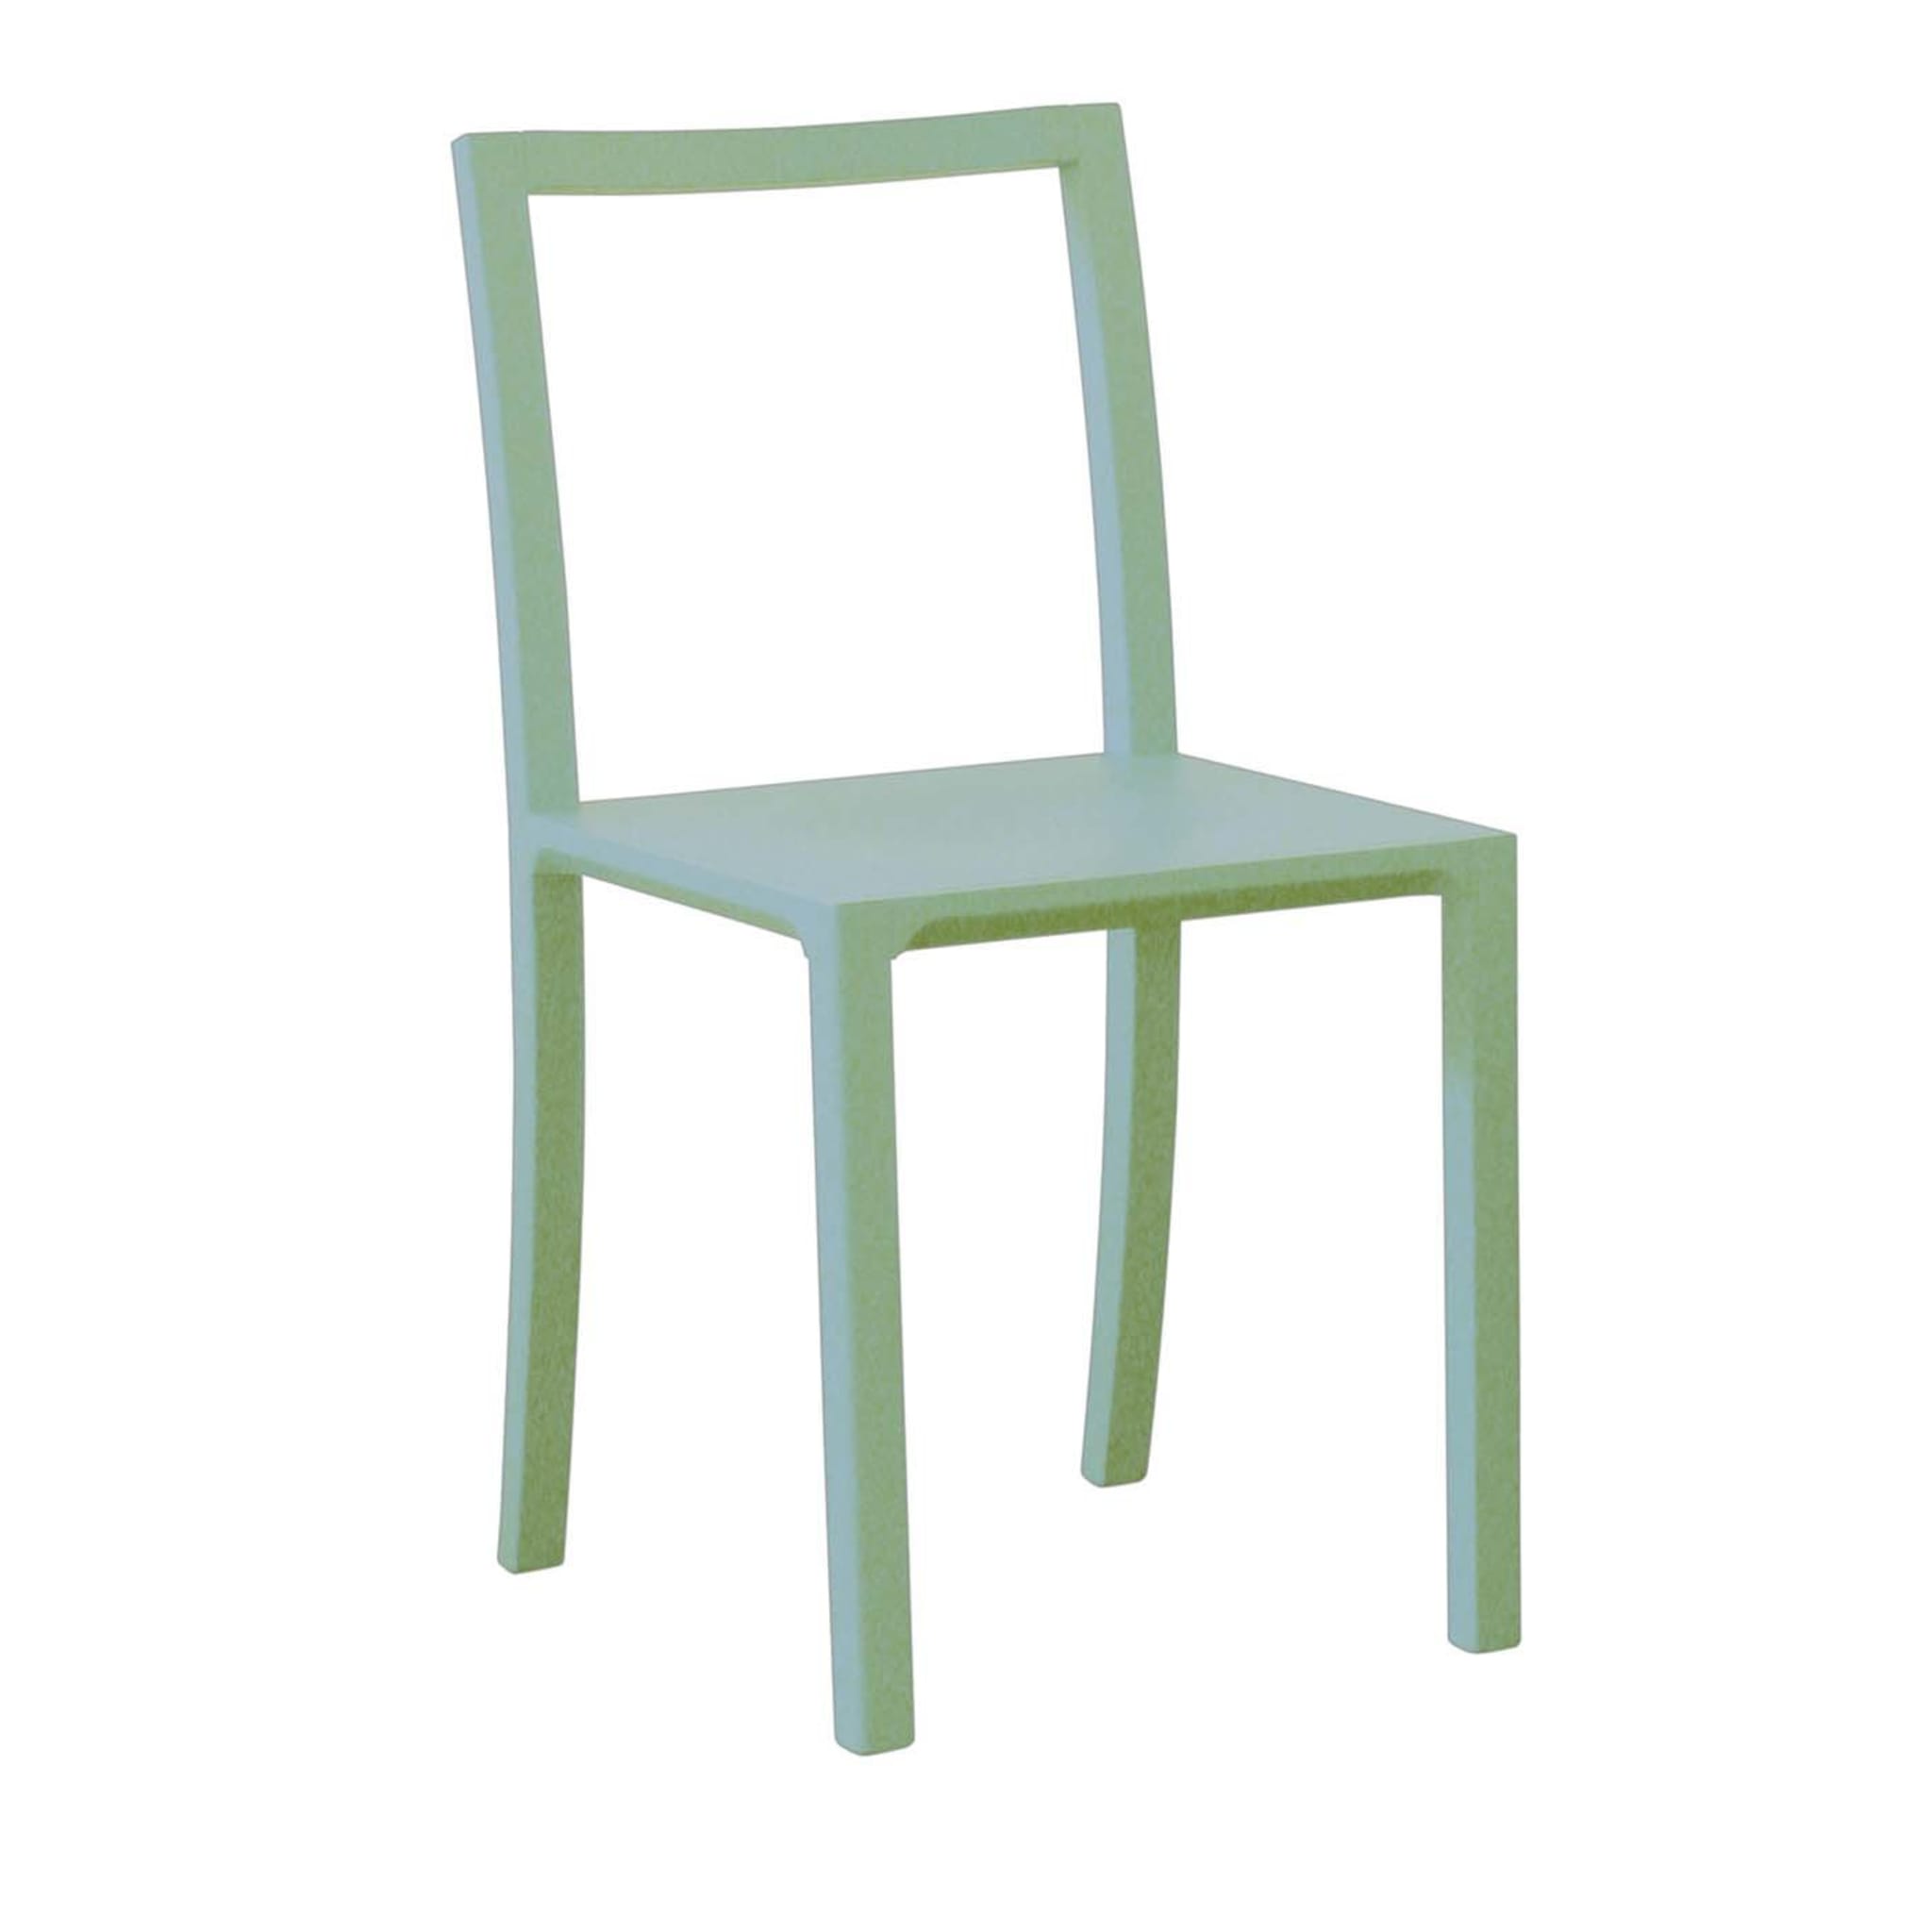 Framework Set of 2 Mint Green Chairs by Steffen Kehrle - Main view